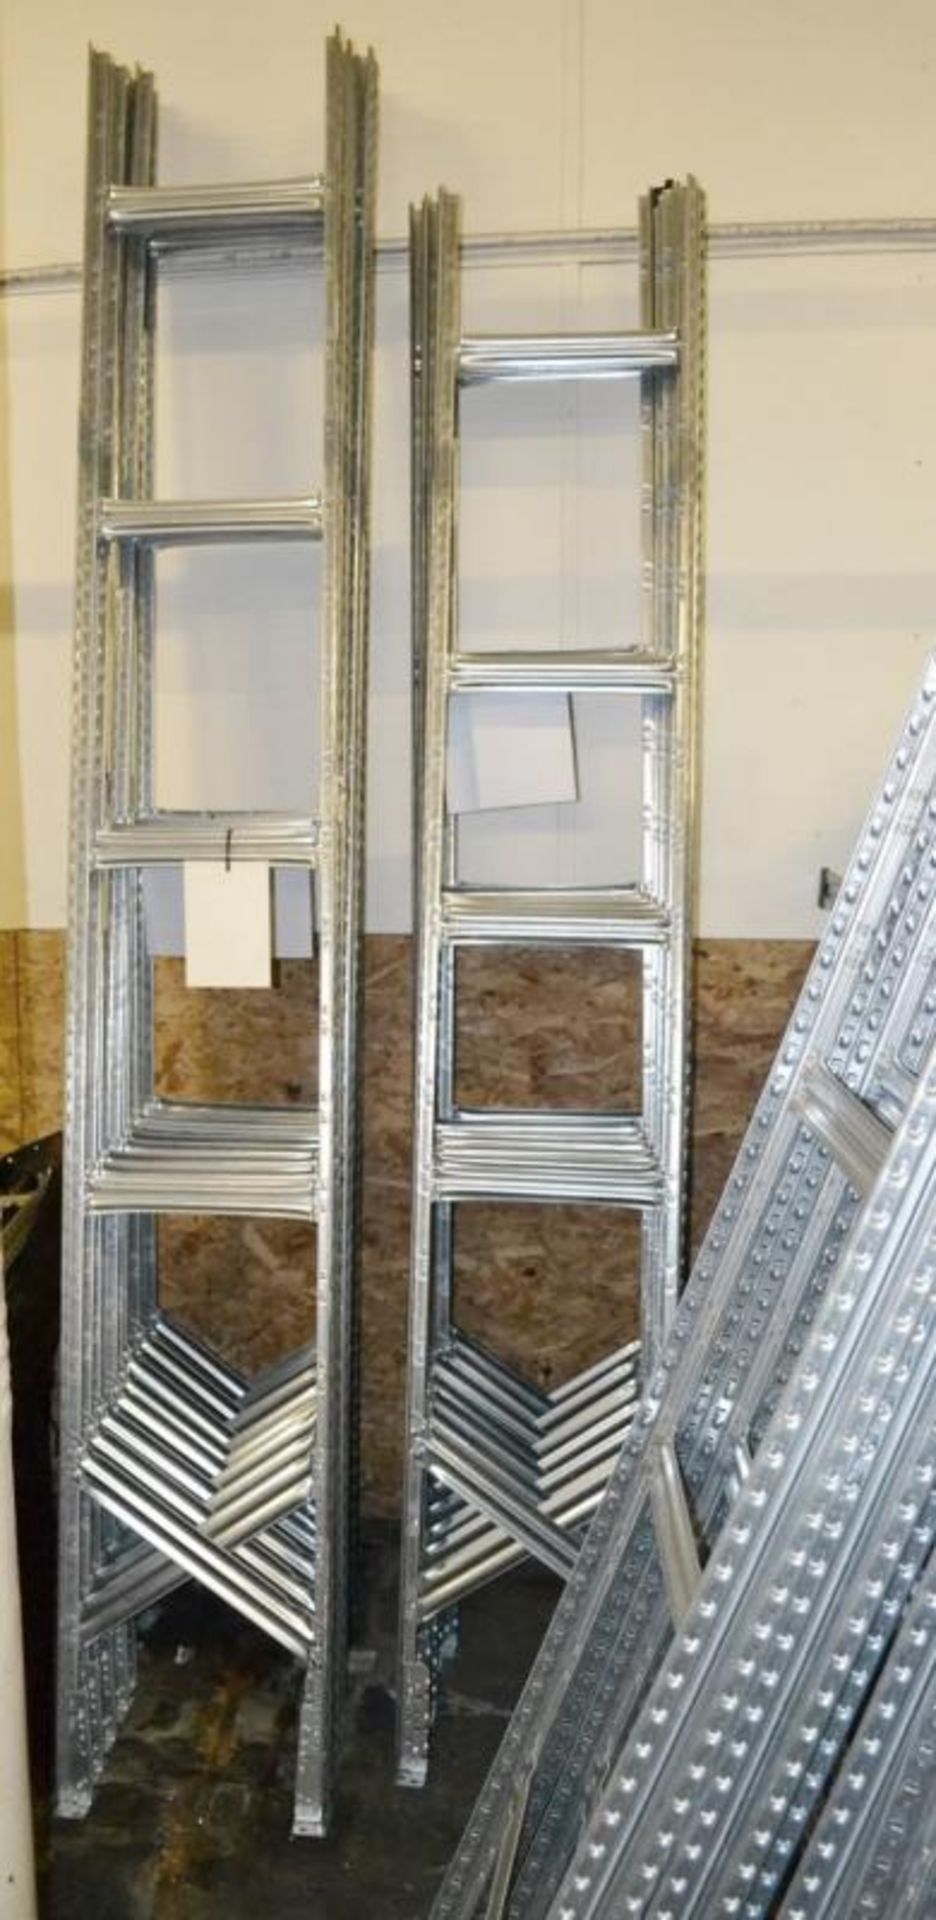 4 x Bays of Metalsistem Steel Modular Storage Shelving - Includes 37 Pieces - Recently Removed - Image 11 of 17